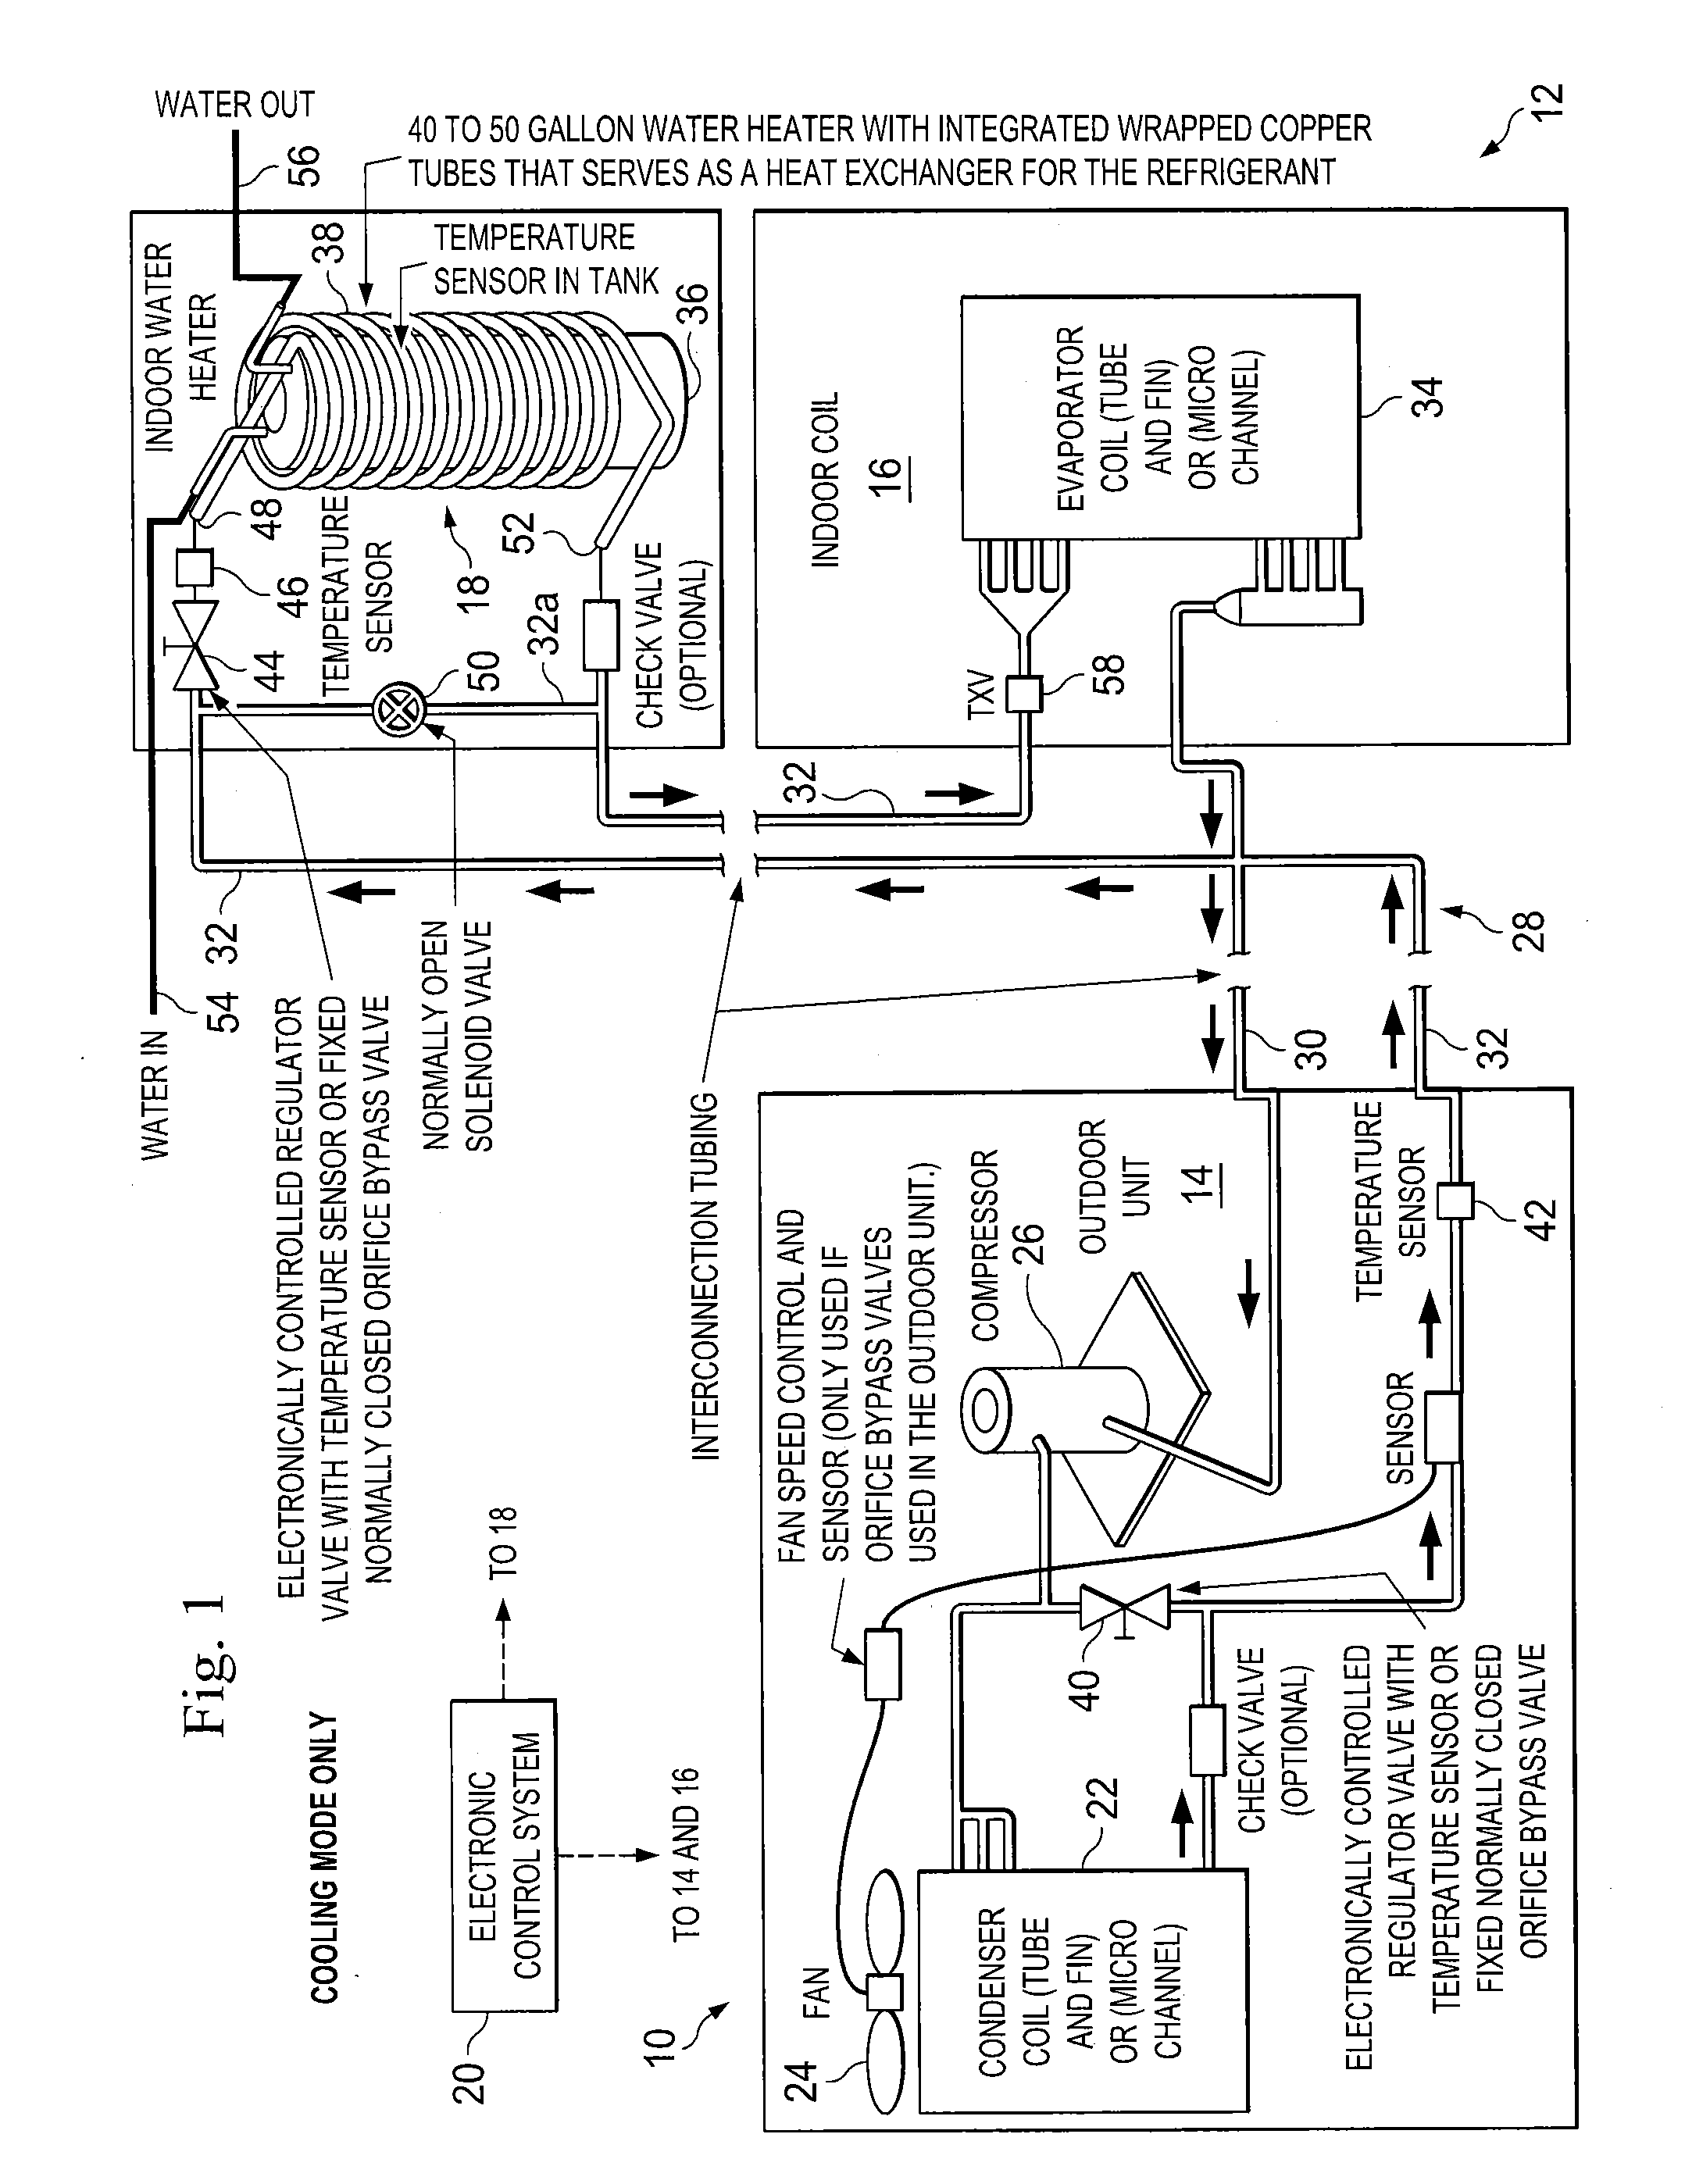 Apparatus and methods for pre-heating water with air conditioning unit or heat pump